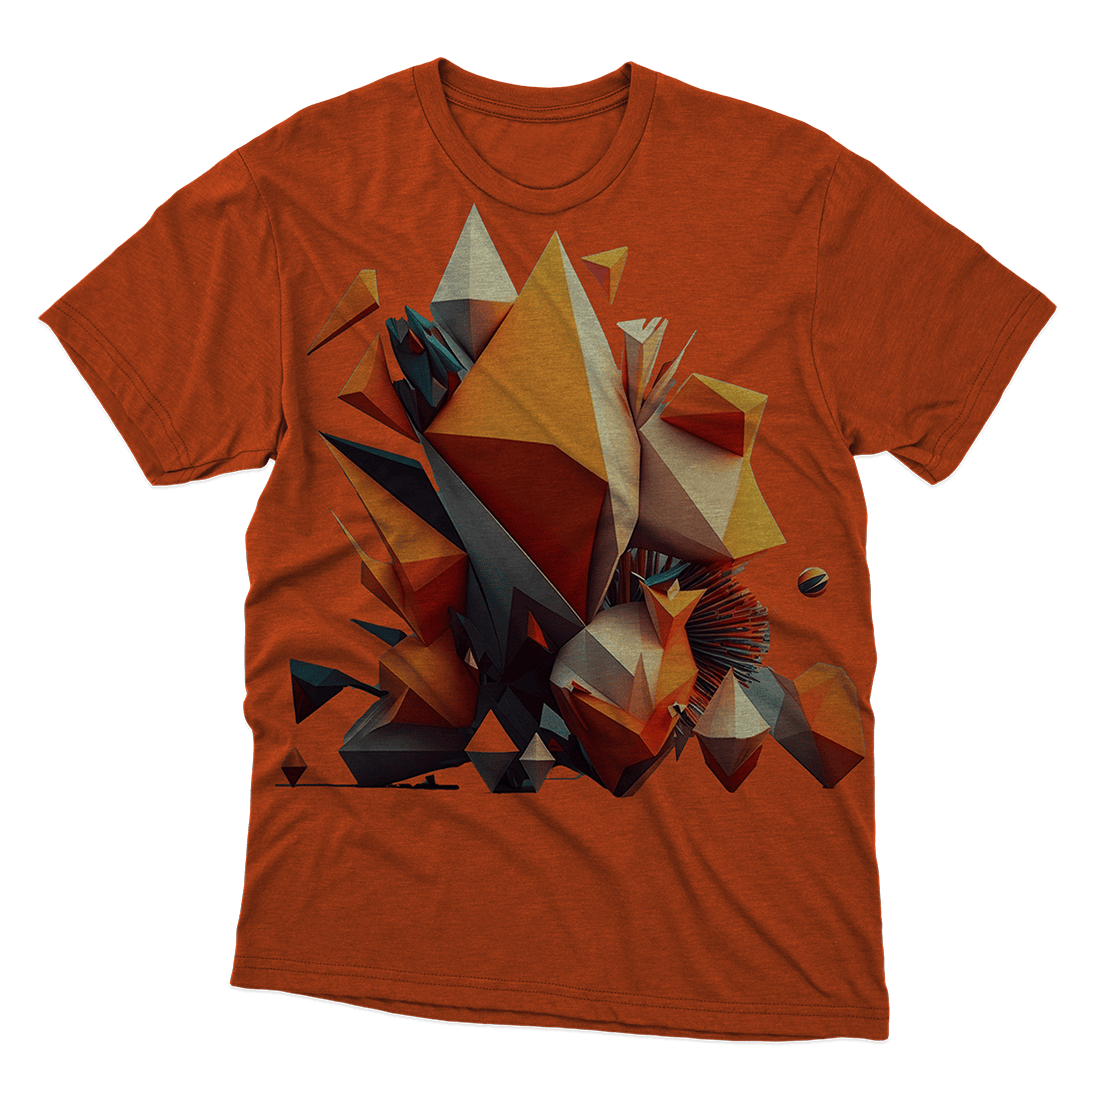 Orange t - shirt with an abstract design.